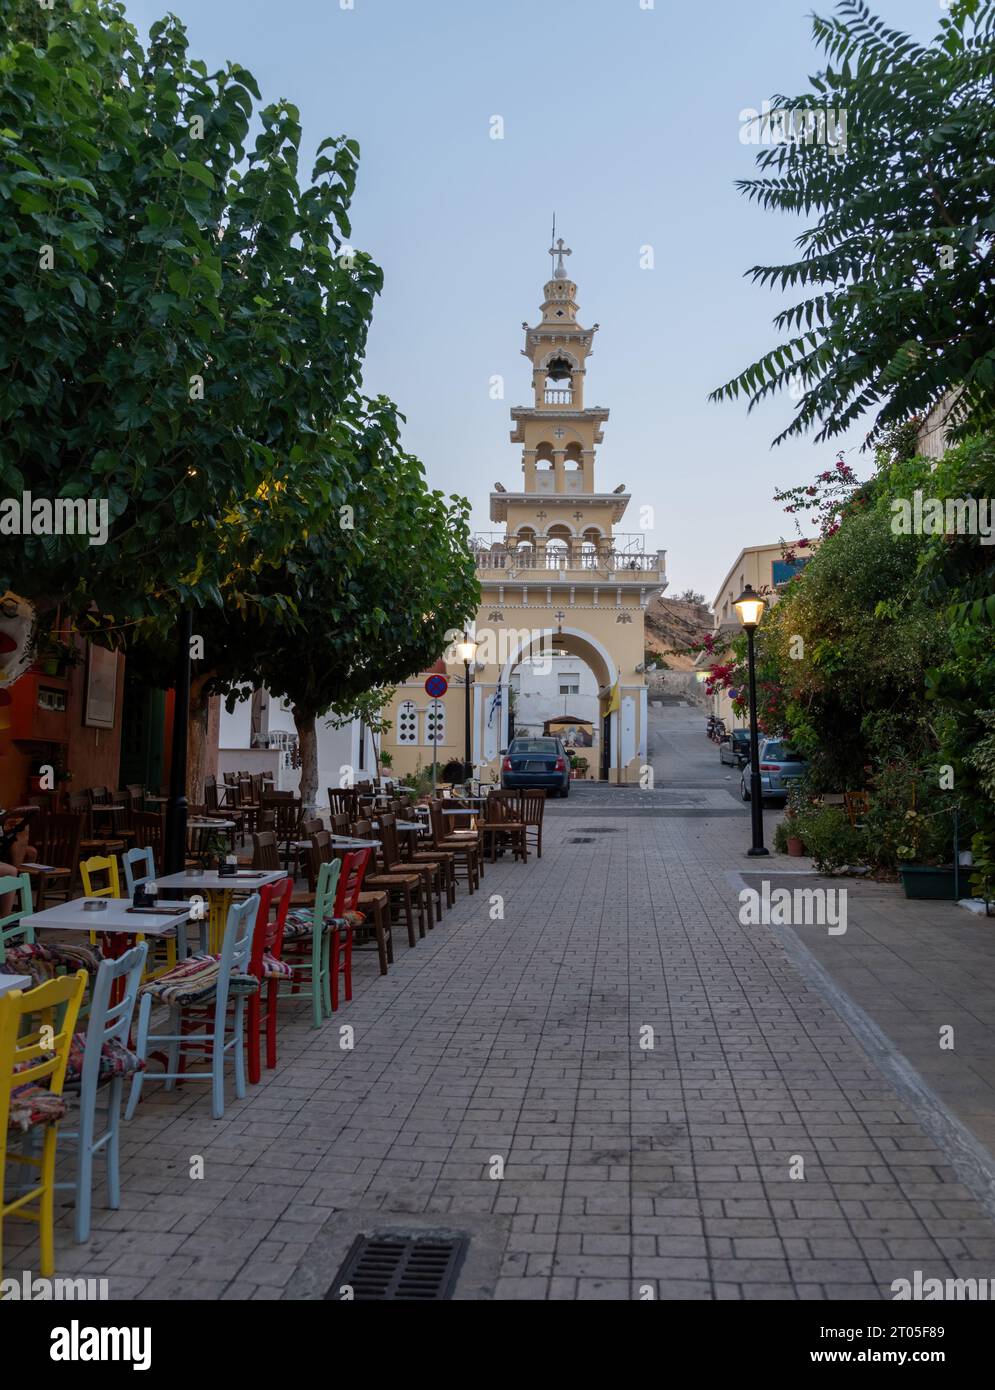 Evangelistra Church Palaiochora Chania, Crete island, Greece. Outdoors cafe on paved street, arched belfry entrance in the afternoon. Vertical Stock Photo